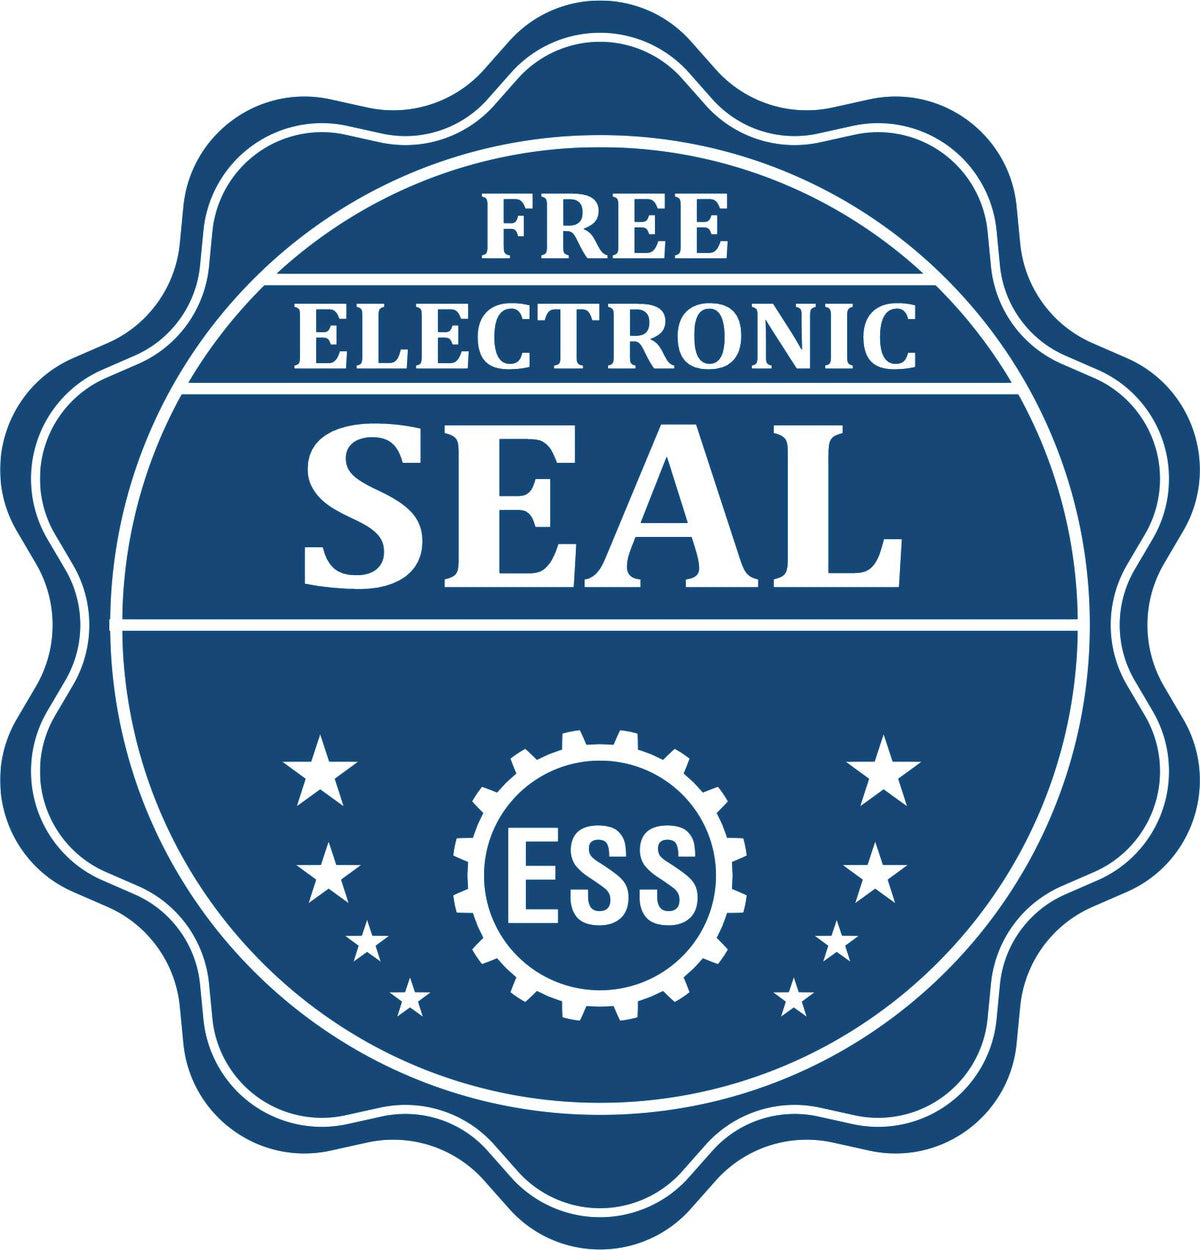 A badge showing a free electronic seal for the Gift Connecticut Land Surveyor Seal with stars and the ESS gear on the emblem.